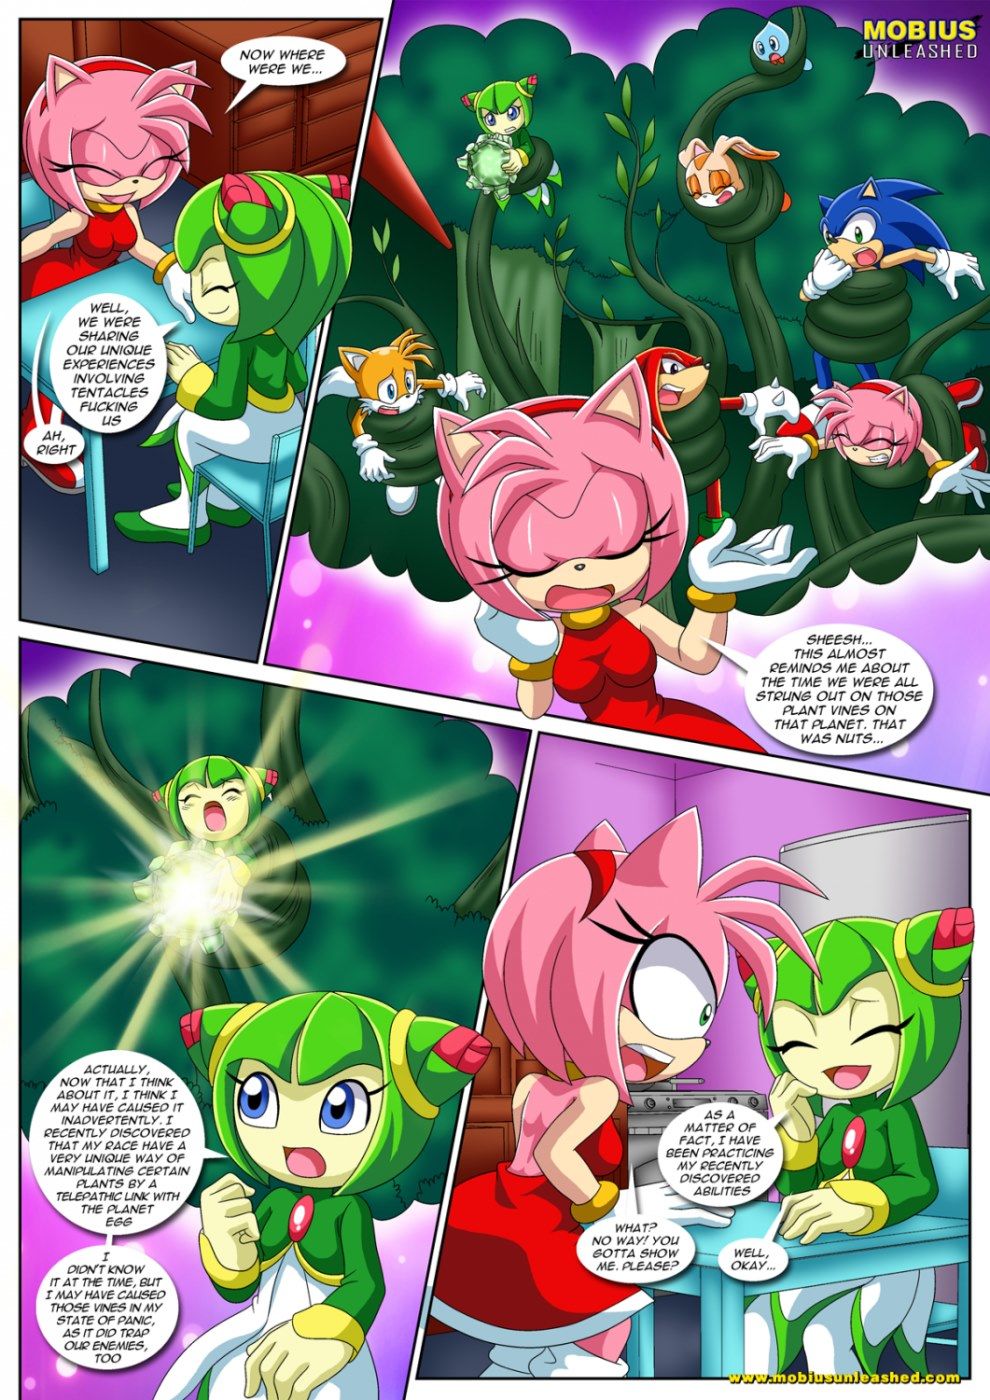 Team GFs Tentacled Tale page 4